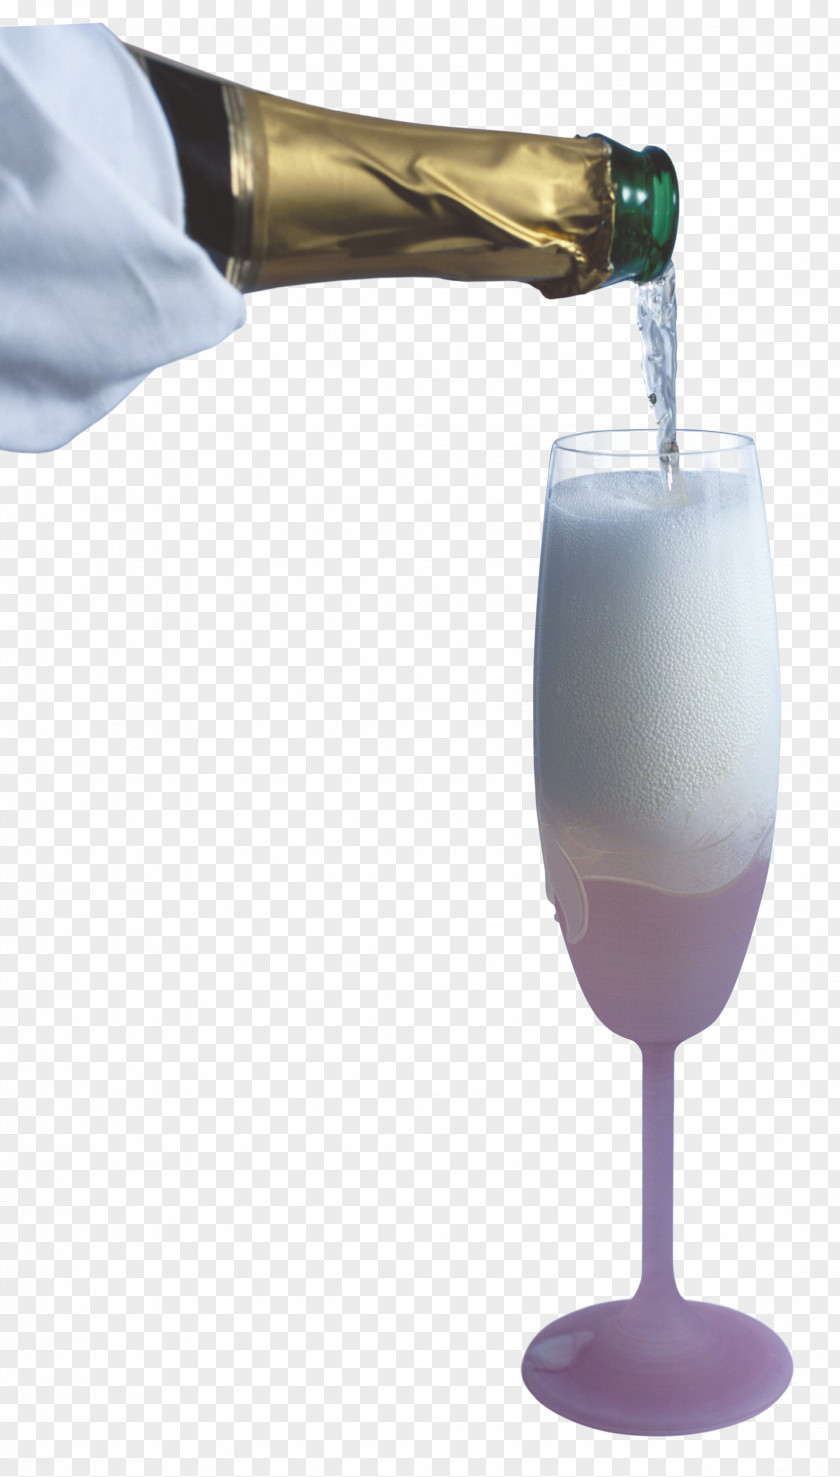 Bottle Wine Glass Champagne Drink PNG